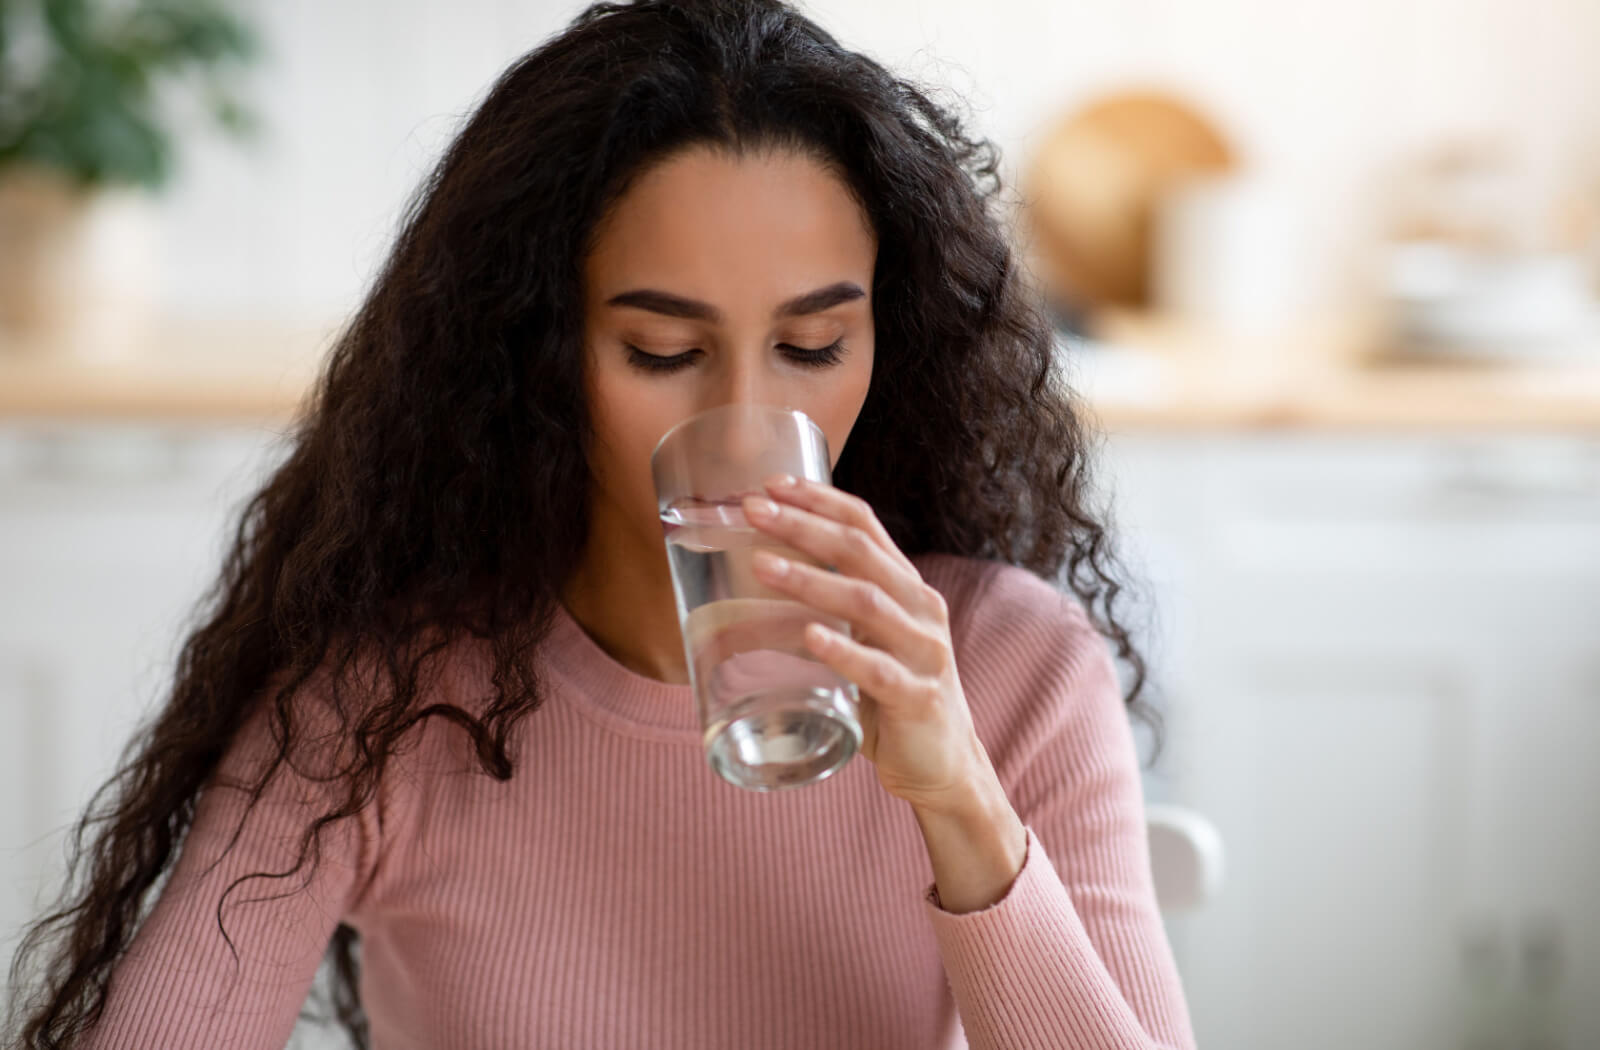 A woman with curly hair drinking a glass of water.